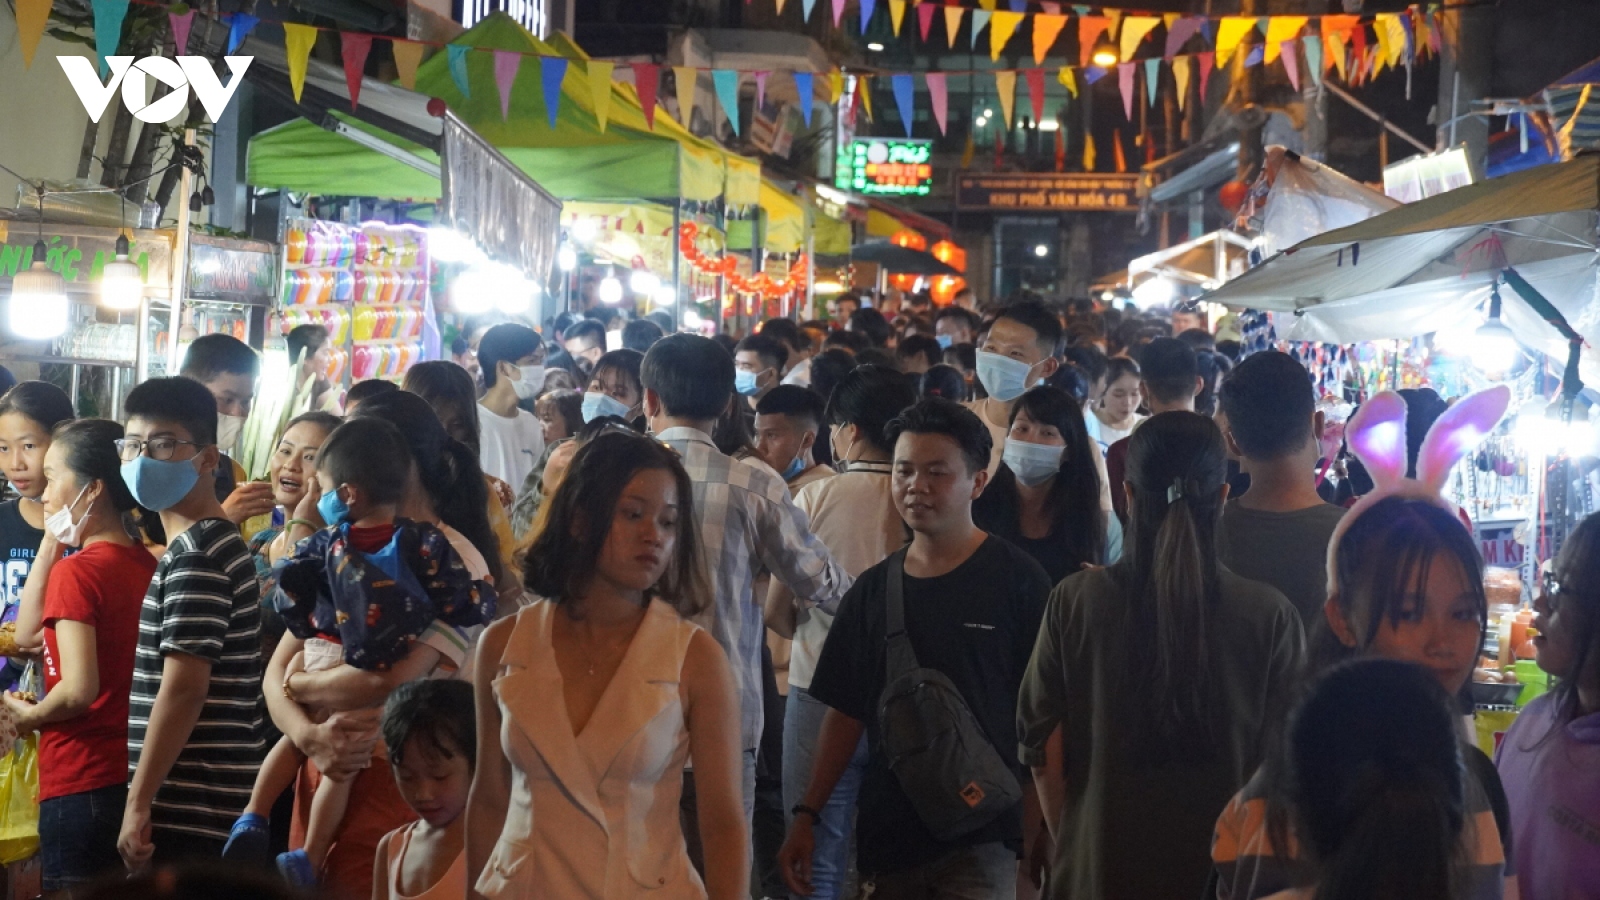 HCM City streets crowded during Mid-Autumn Festival celebrations